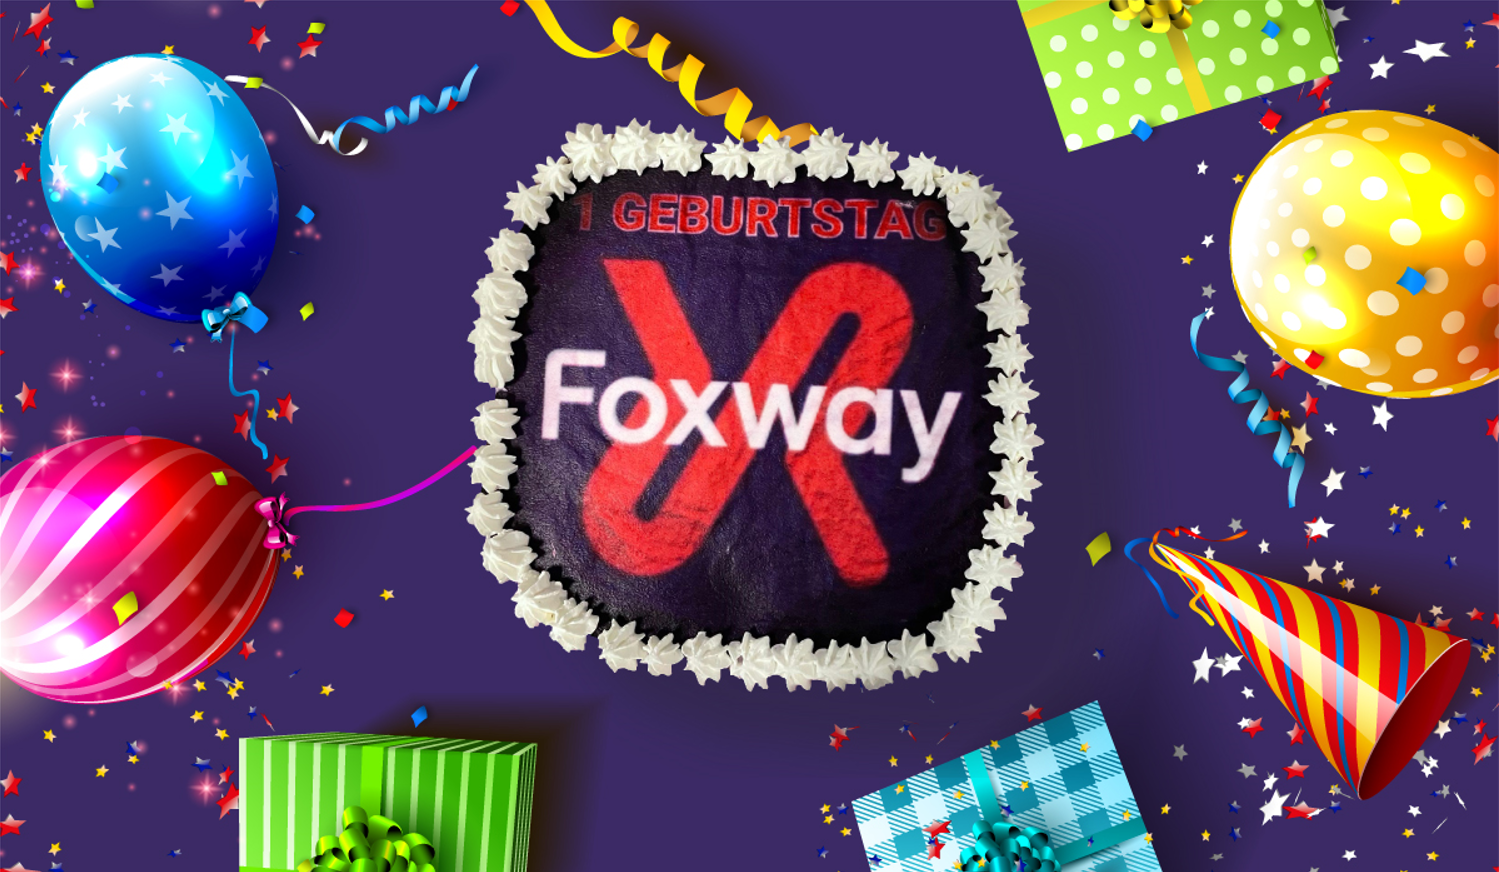 Foxway celebrates the success of Foxway Germany after the acquisition of Flip4 in 2021